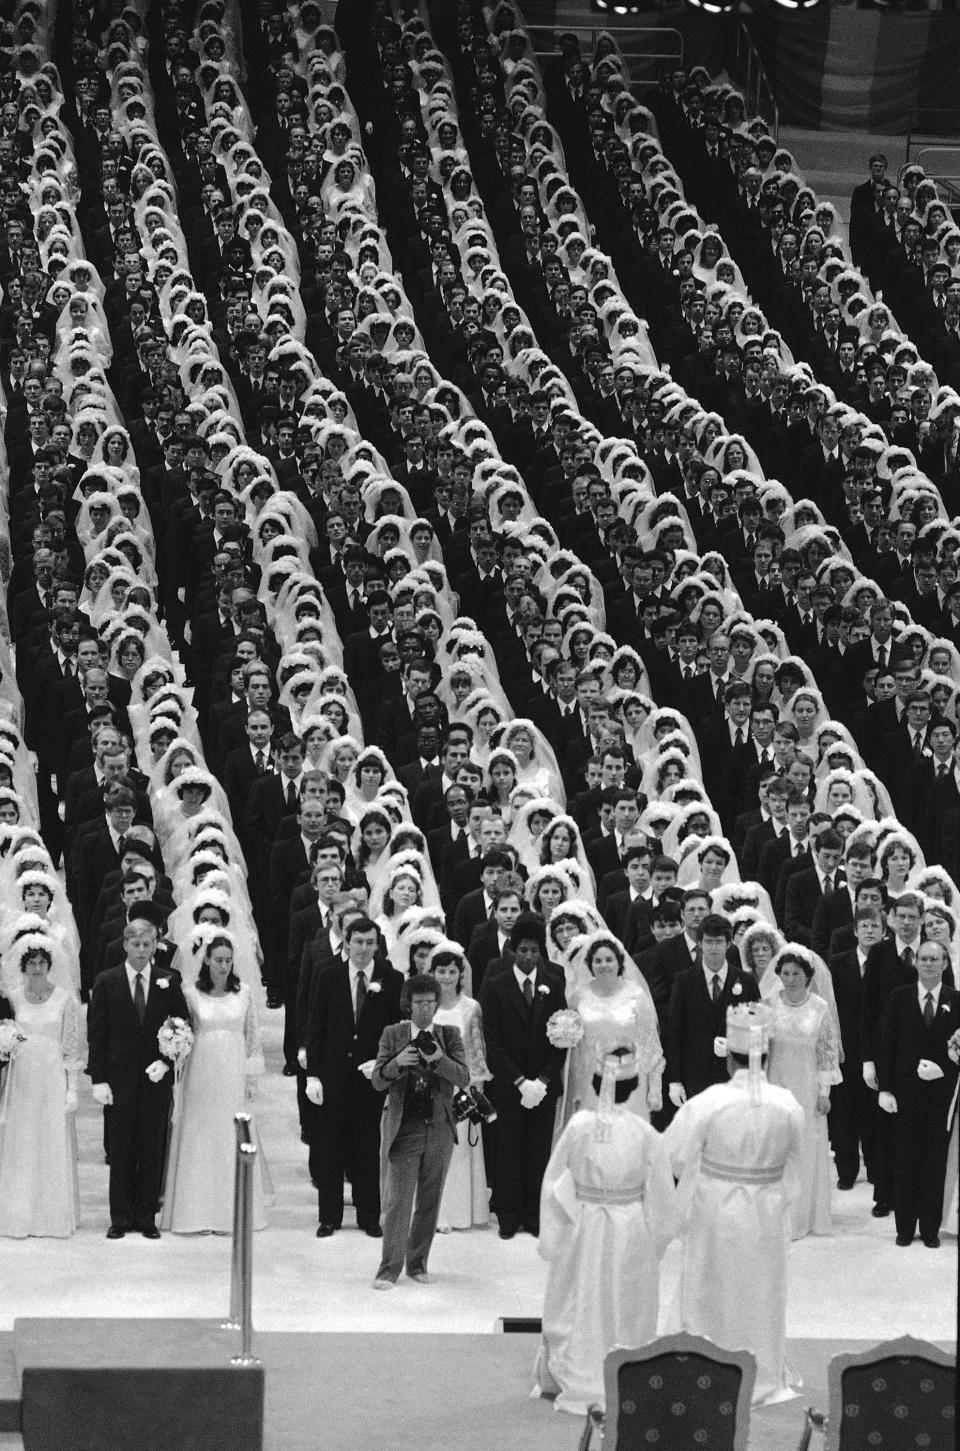 The Rev. Sun Myung Moon and his wife stand before some of the 2,200 couples who were married in New York's Madison Square Garden, July 1, 1982. The bride's dresses were made of identical blue satin and lace while the grooms all wore navy blue suits and red ties. About a third of the couple included men and women of difference races or nationalities, in keeping with the Unification Church's belief that interracial marriages can help end racism.